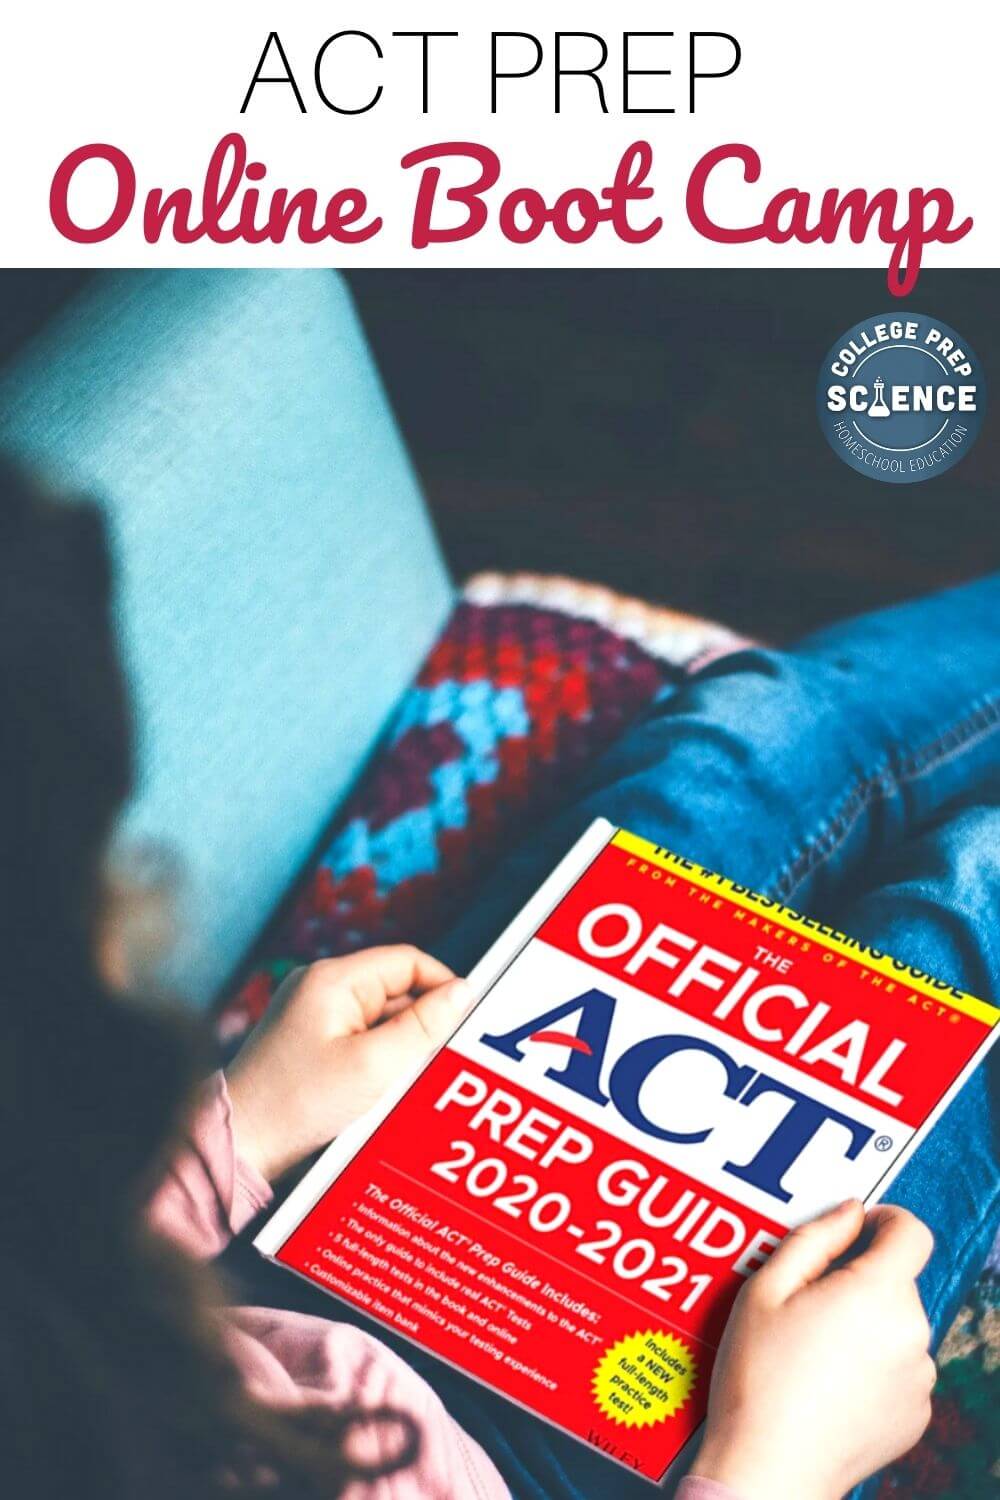 ACT PREP Online Boot Camp